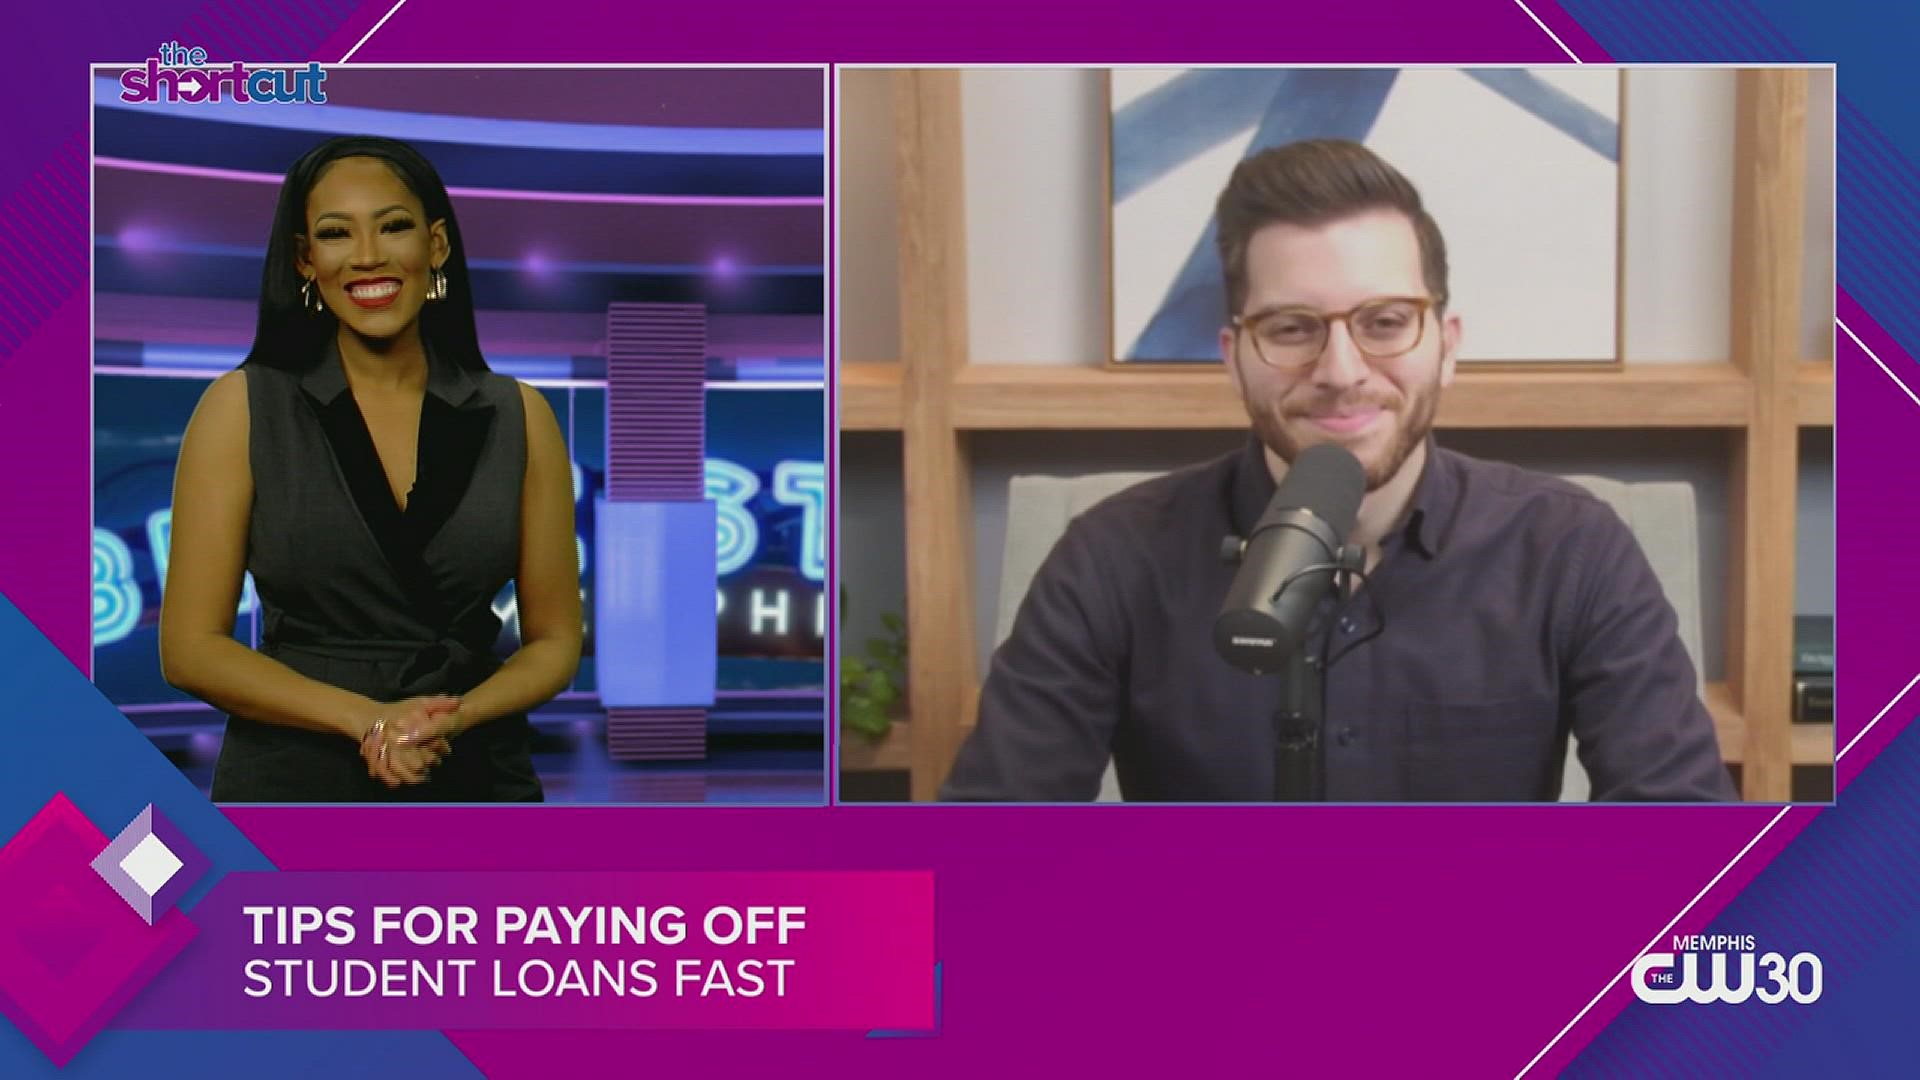 Join lifestyle host Sydney Neely and personal finance expert George Kamel to find out how YOU can pay off your student loans fast and easy using some proven tips!